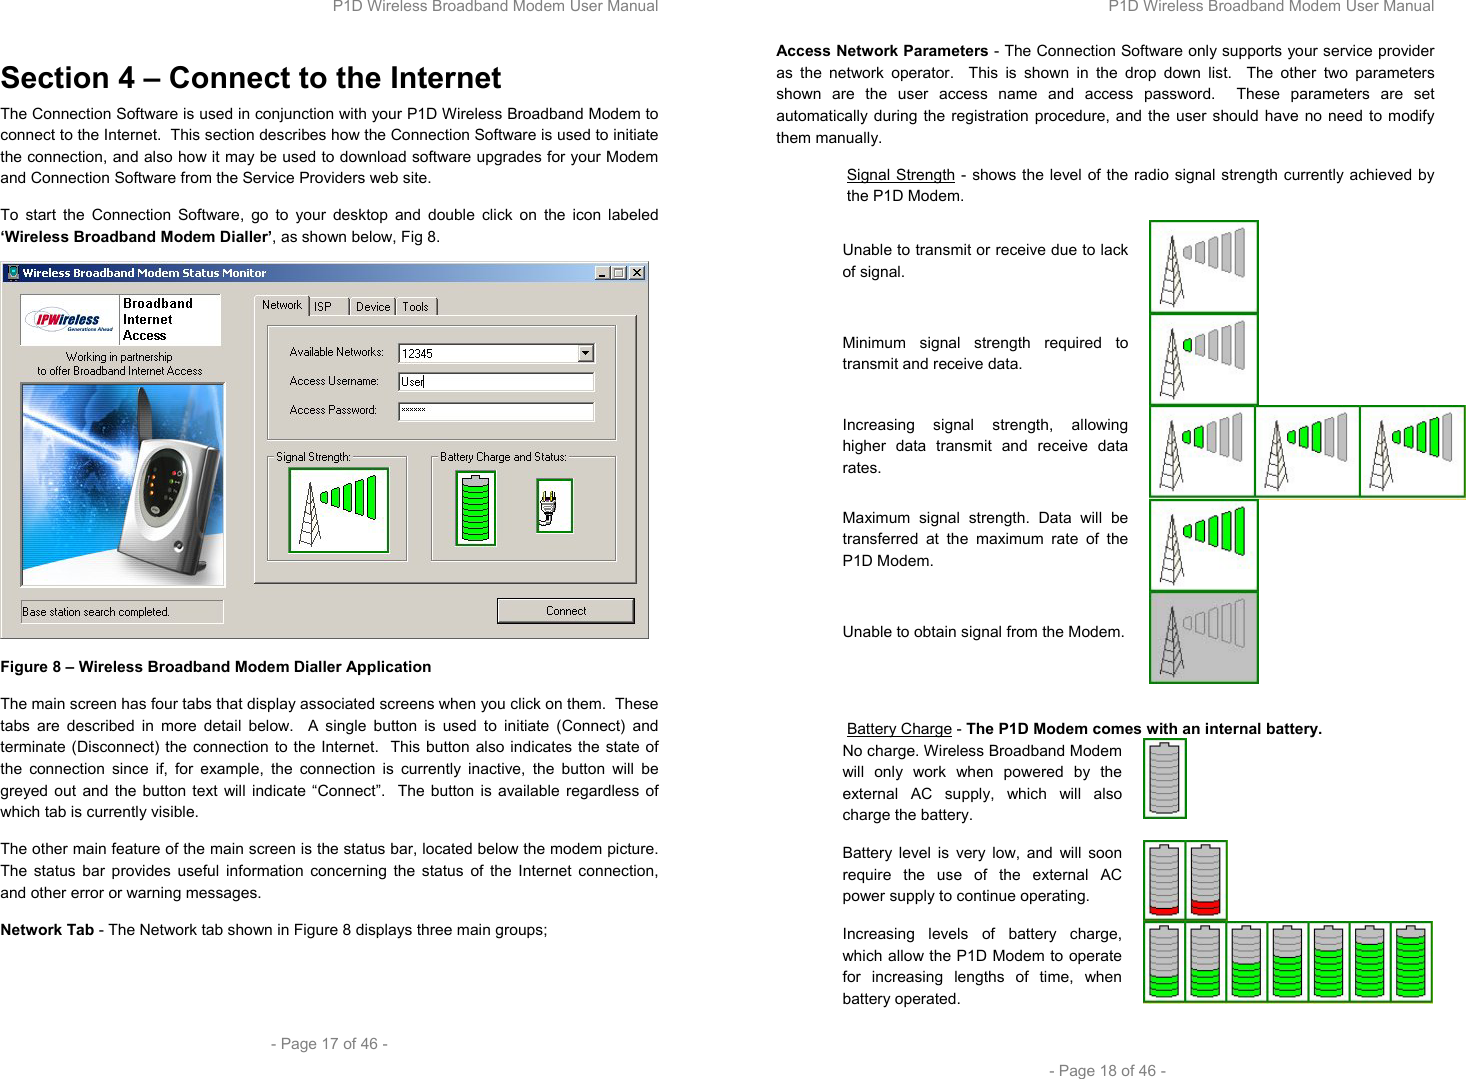 P1D Wireless Broadband Modem User Manual  - Page 17 of 46 -  Section 4 – Connect to the Internet The Connection Software is used in conjunction with your P1D Wireless Broadband Modem to connect to the Internet.  This section describes how the Connection Software is used to initiate the connection, and also how it may be used to download software upgrades for your Modem and Connection Software from the Service Providers web site. To start the Connection Software, go to your desktop and double click on the icon labeled ‘Wireless Broadband Modem Dialler’, as shown below, Fig 8.  Figure 8 – Wireless Broadband Modem Dialler Application The main screen has four tabs that display associated screens when you click on them.  These tabs are described in more detail below.  A single button is used to initiate (Connect) and terminate (Disconnect) the connection to the Internet.  This button also indicates the state of the connection since if, for example, the connection is currently inactive, the button will be greyed out and the button text will indicate “Connect”.  The button is available regardless of which tab is currently visible.  The other main feature of the main screen is the status bar, located below the modem picture.  The status bar provides useful information concerning the status of the Internet connection, and other error or warning messages. Network Tab - The Network tab shown in Figure 8 displays three main groups;  P1D Wireless Broadband Modem User Manual  - Page 18 of 46 - Access Network Parameters - The Connection Software only supports your service provider as the network operator.  This is shown in the drop down list.  The other two parameters shown are the user access name and access password.  These parameters are set automatically during the registration procedure, and the user should have no need to modify them manually.  Signal Strength - shows the level of the radio signal strength currently achieved by the P1D Modem. Unable to transmit or receive due to lack of signal.  Minimum signal strength required to transmit and receive data.  Increasing signal strength, allowing higher data transmit and receive data rates.  Maximum signal strength. Data will be transferred at the maximum rate of the P1D Modem.  Unable to obtain signal from the Modem.    Battery Charge - The P1D Modem comes with an internal battery.  No charge. Wireless Broadband Modem will only work when powered by the external AC supply, which will also charge the battery.   Battery level is very low, and will soon require the use of the external AC power supply to continue operating.  Increasing levels of battery charge, which allow the P1D Modem to operate for increasing lengths of time, when battery operated.   